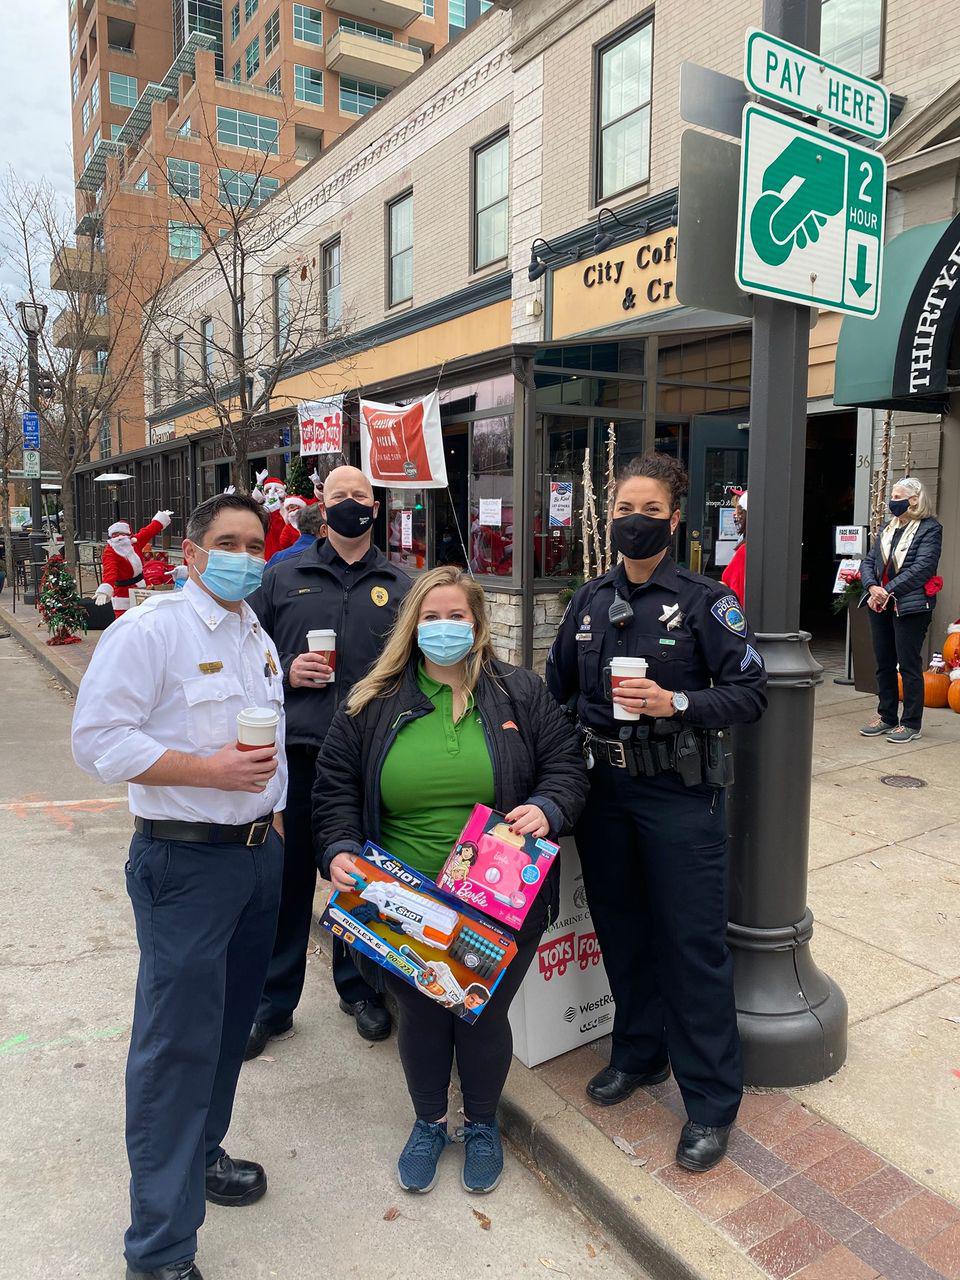 We had a blast at the Toys for Tots drive with the Clayton Missouri Police Department and the City of Clayton Fire Department! We’re really feeling the Christmas Spirit!